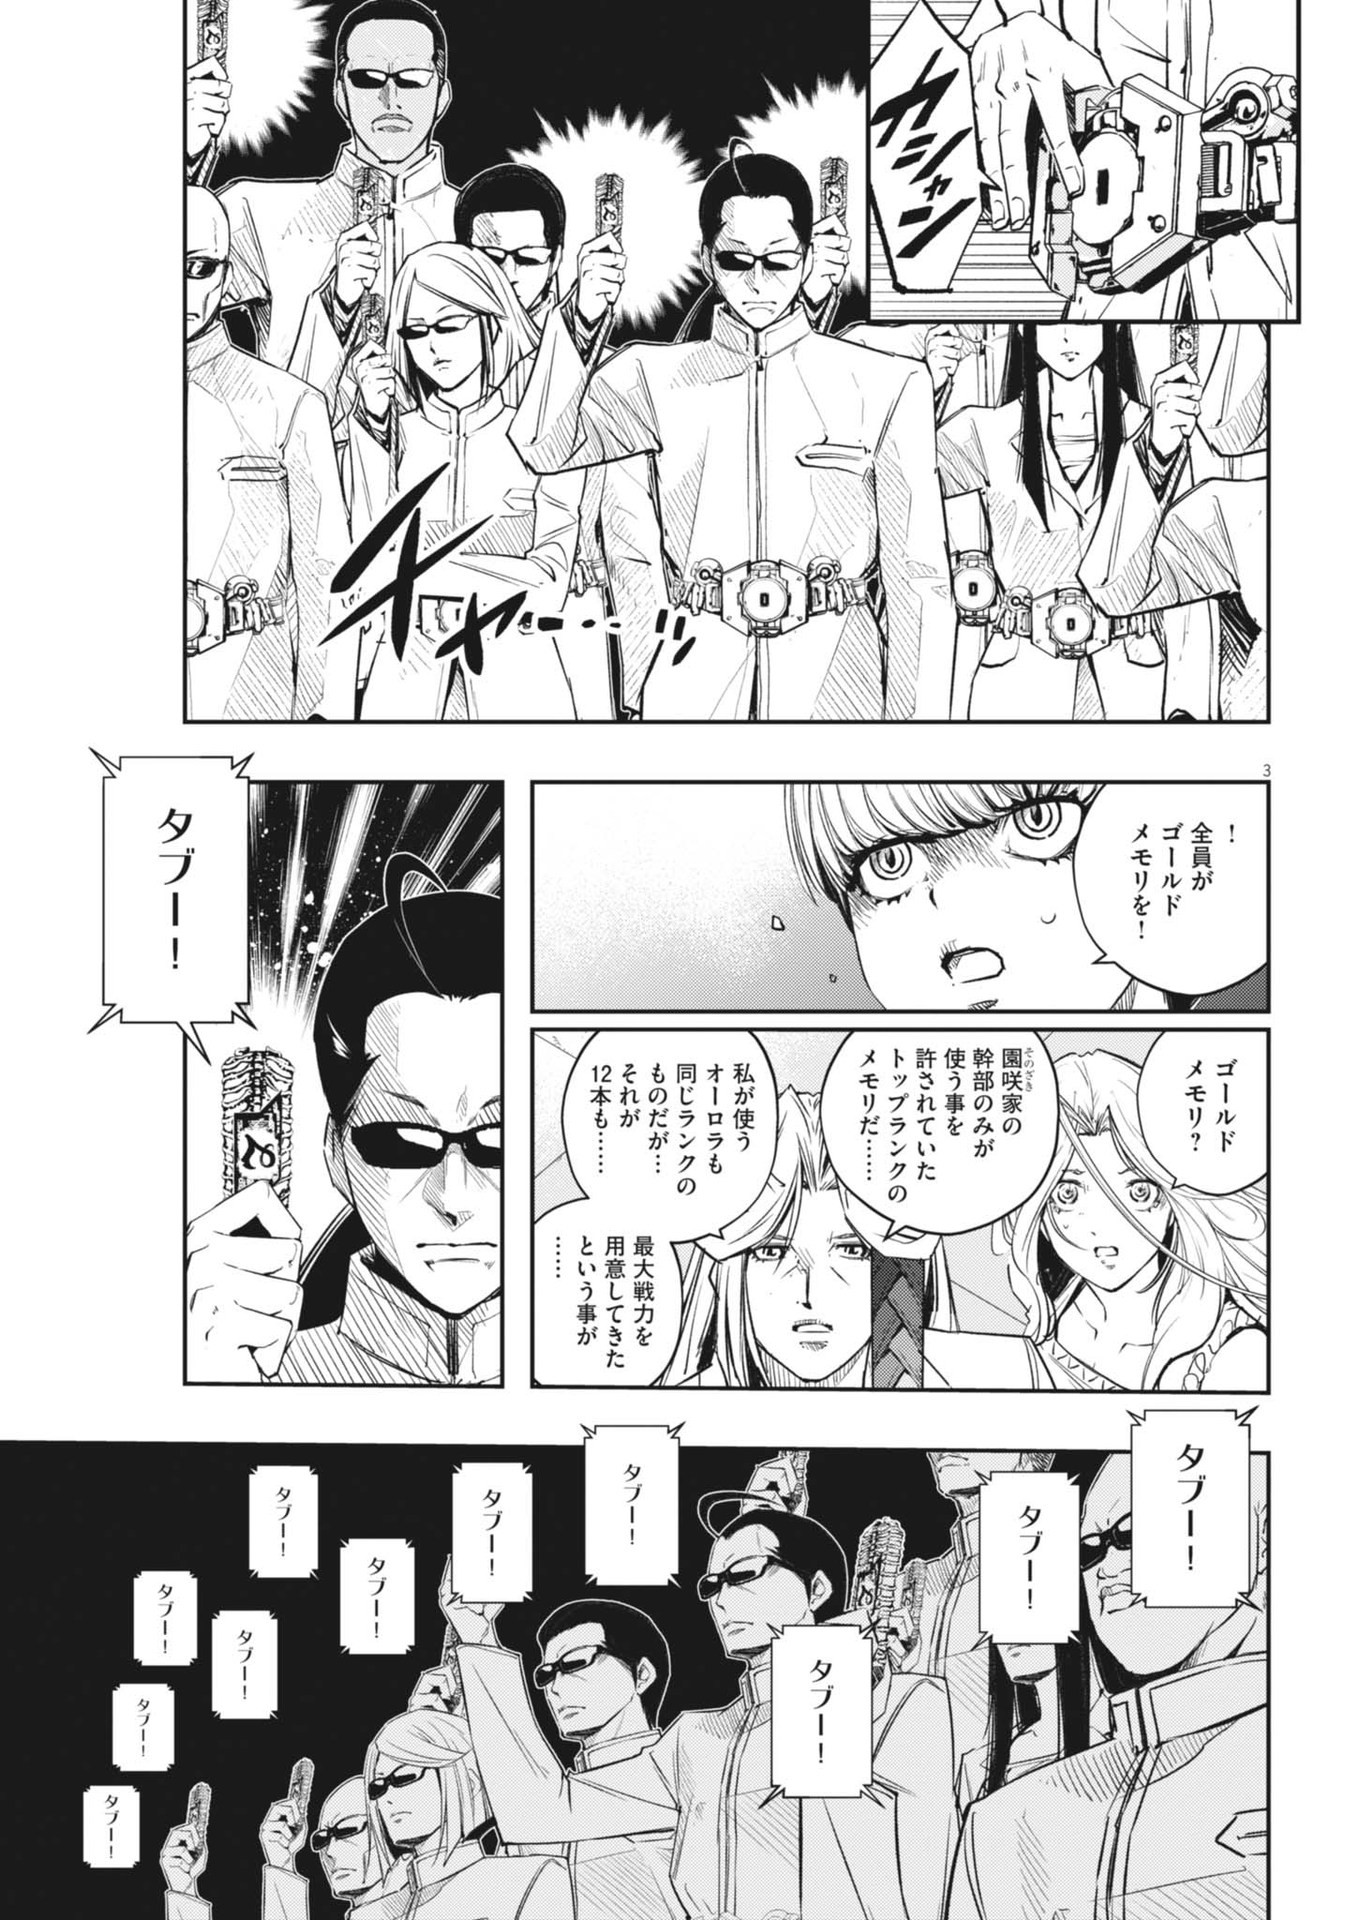 Kamen Rider W: Fuuto Tantei - Chapter 148 - Page 4